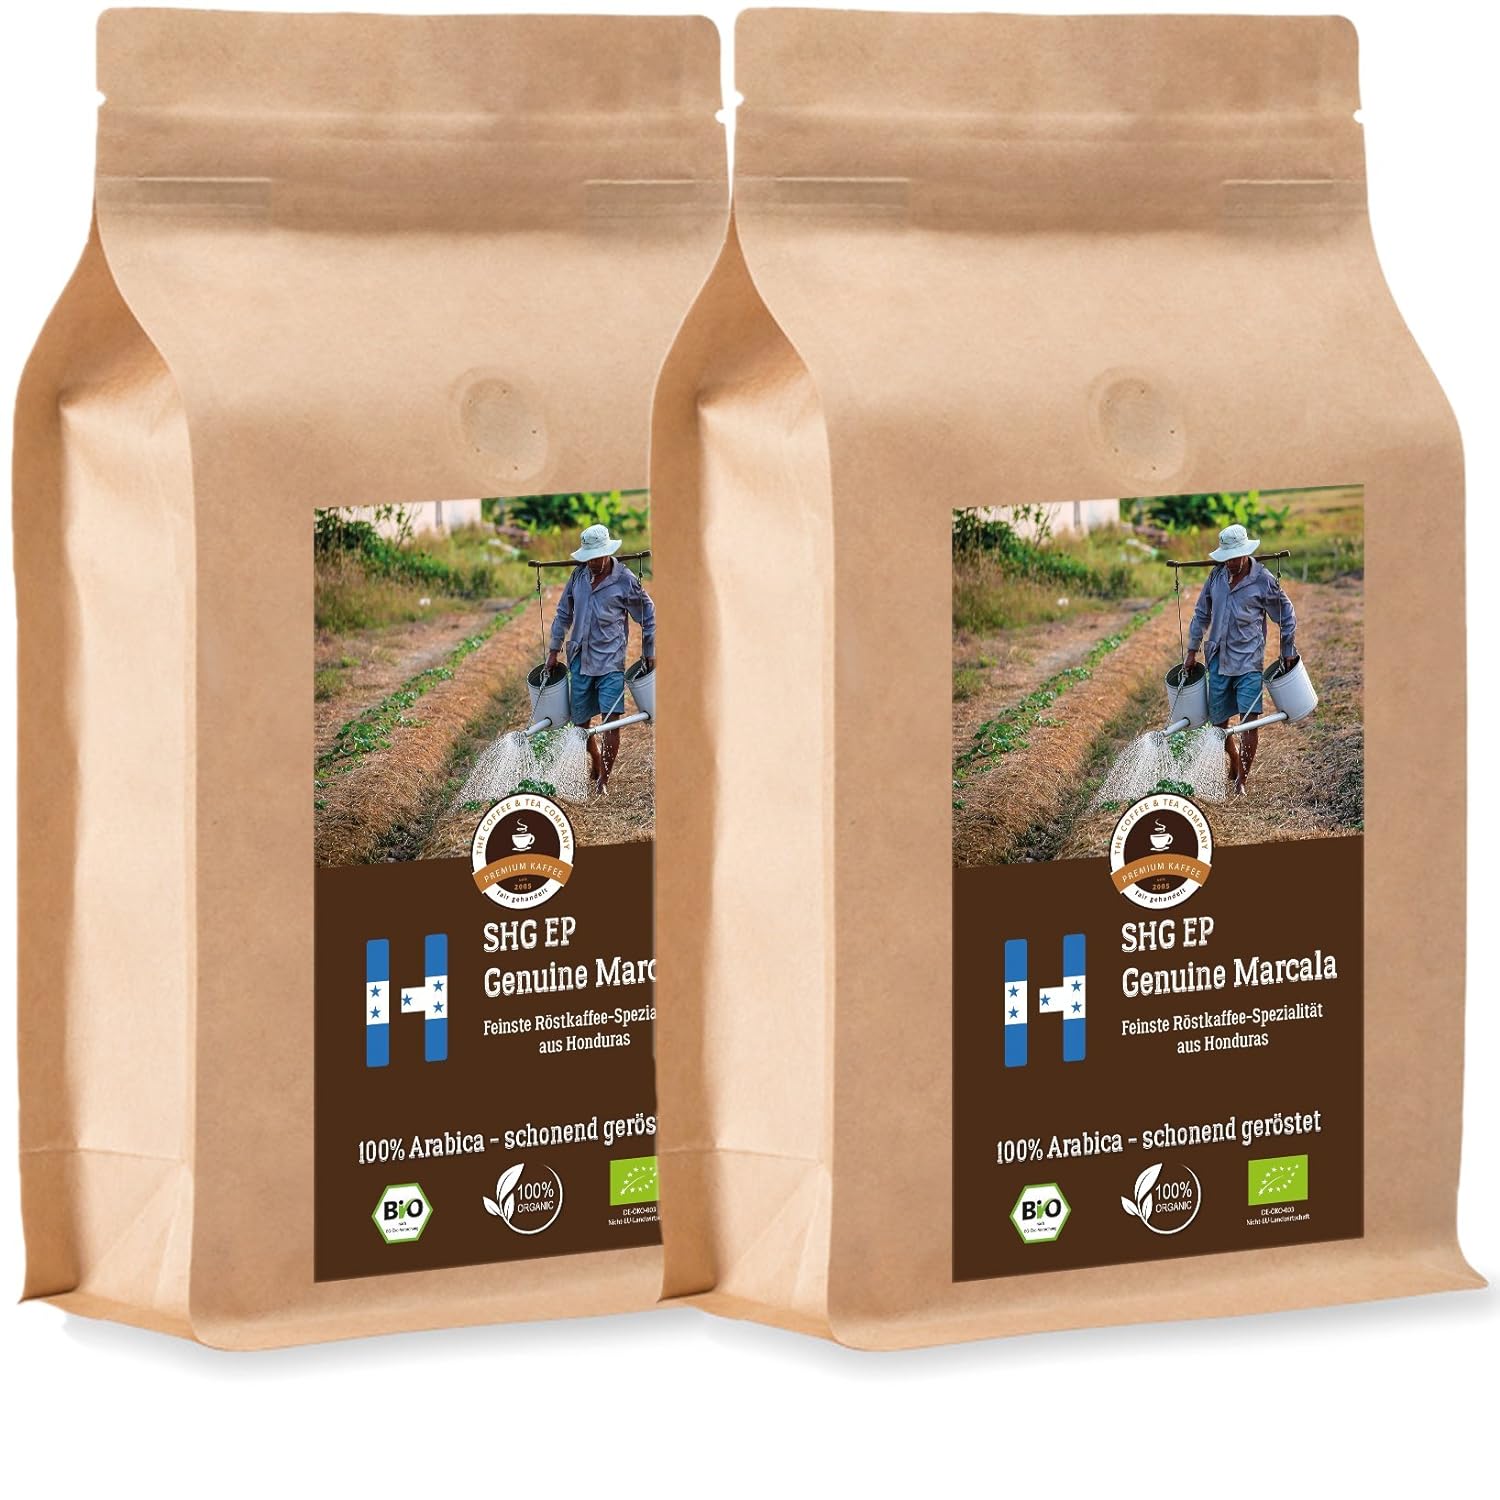 Coffee Globetrotter - Organic Honduras Genuine Marcala - 2 x 1000 g Medium Ground - for Fully Automatic Coffee Grinder - Roasted Coffee from Organic Cultivation | Refill Pack Economy Pack